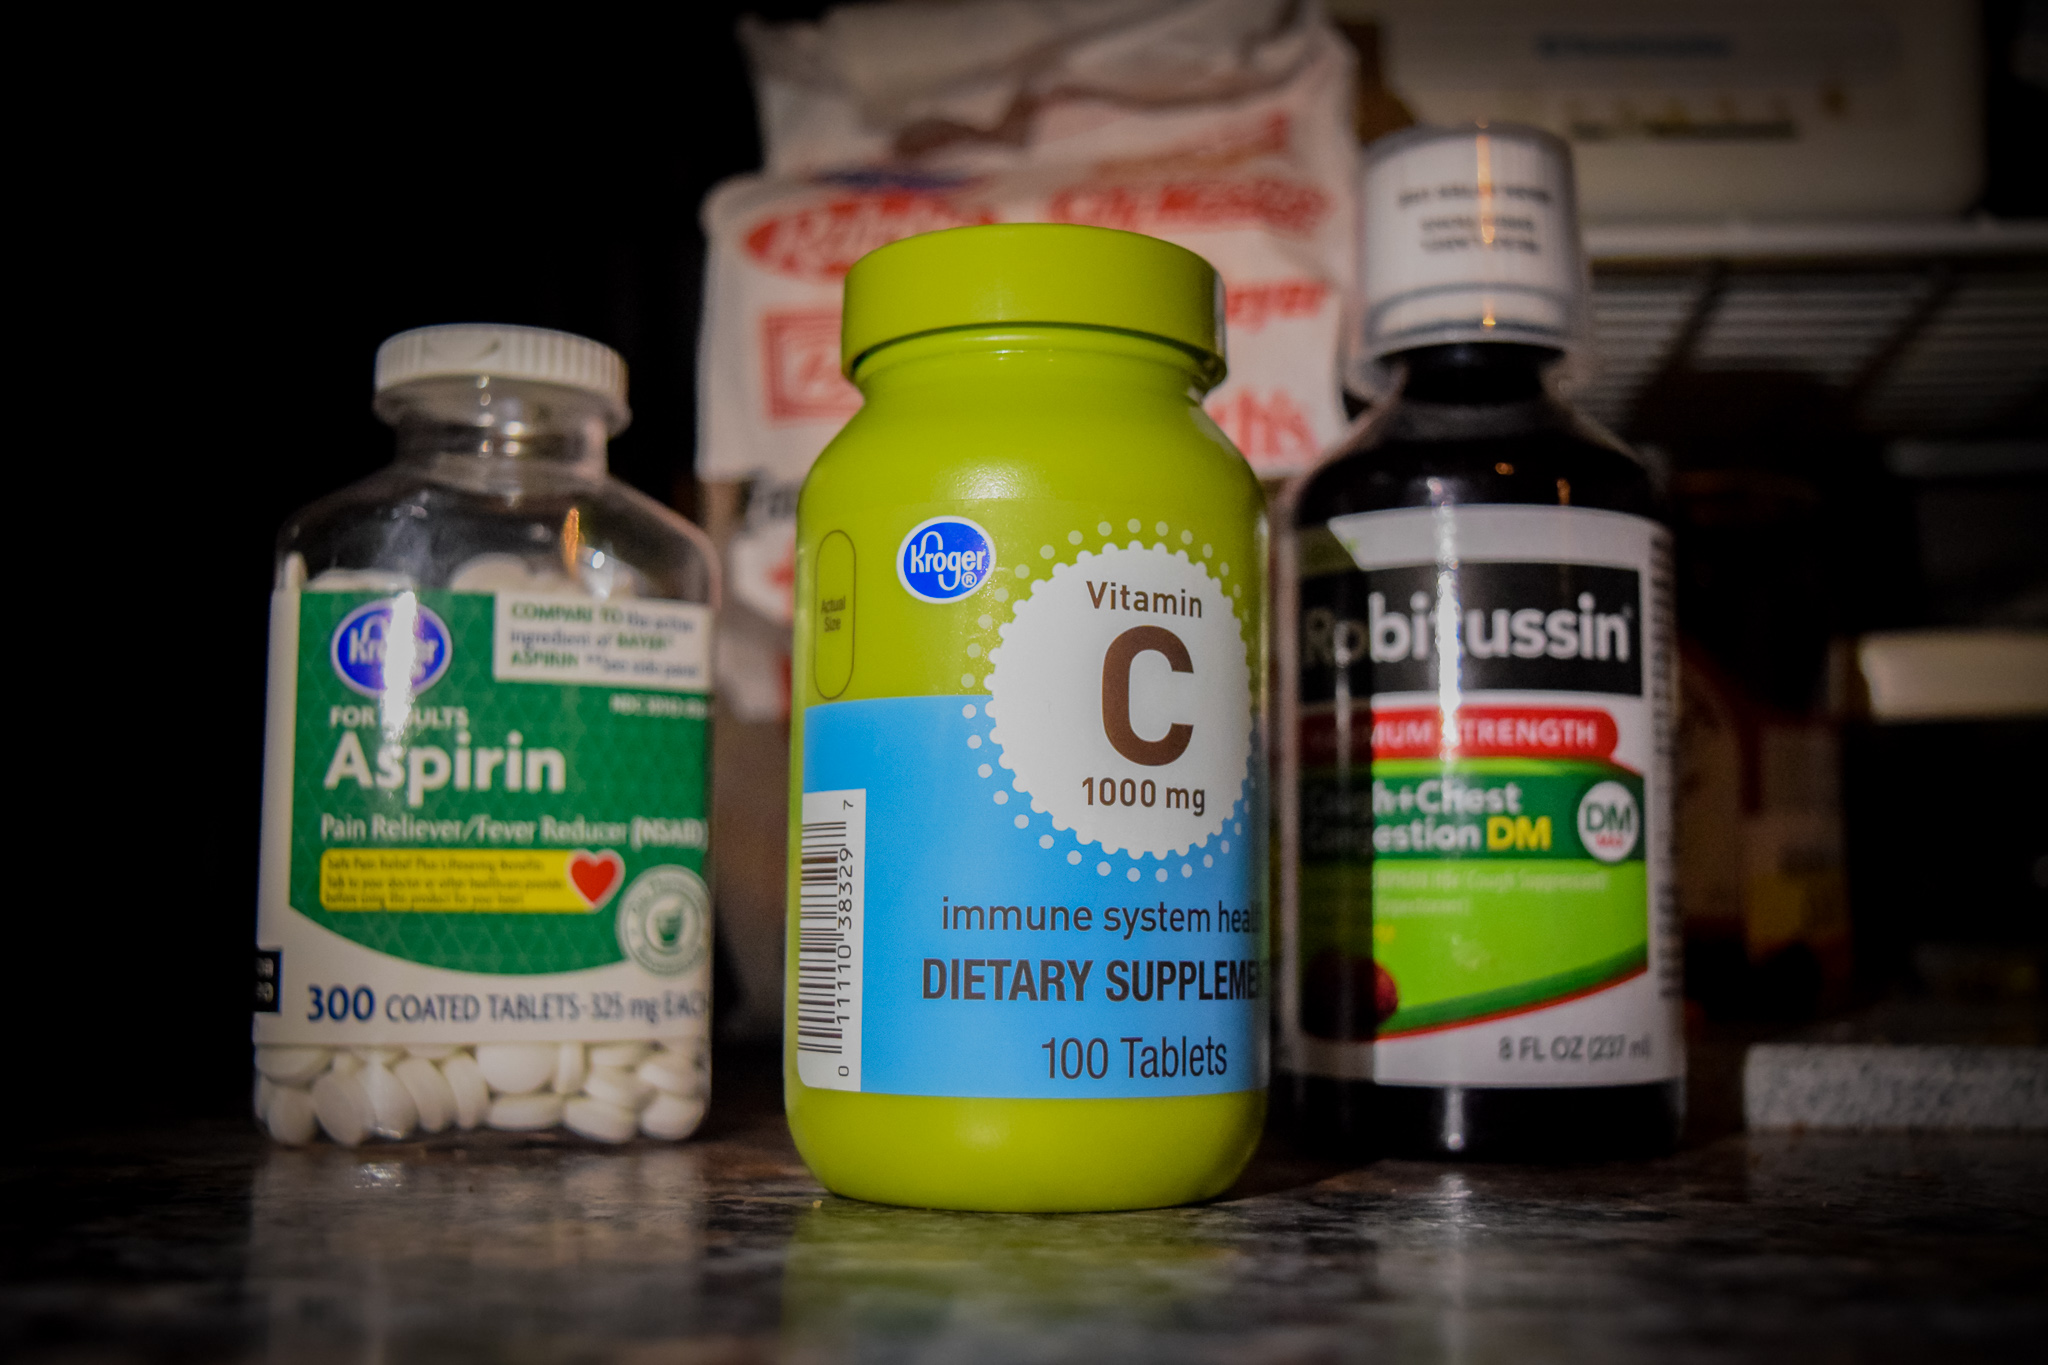 Vitamins and medicine | Photo by Jessica Fugett | The Wright State Guardian